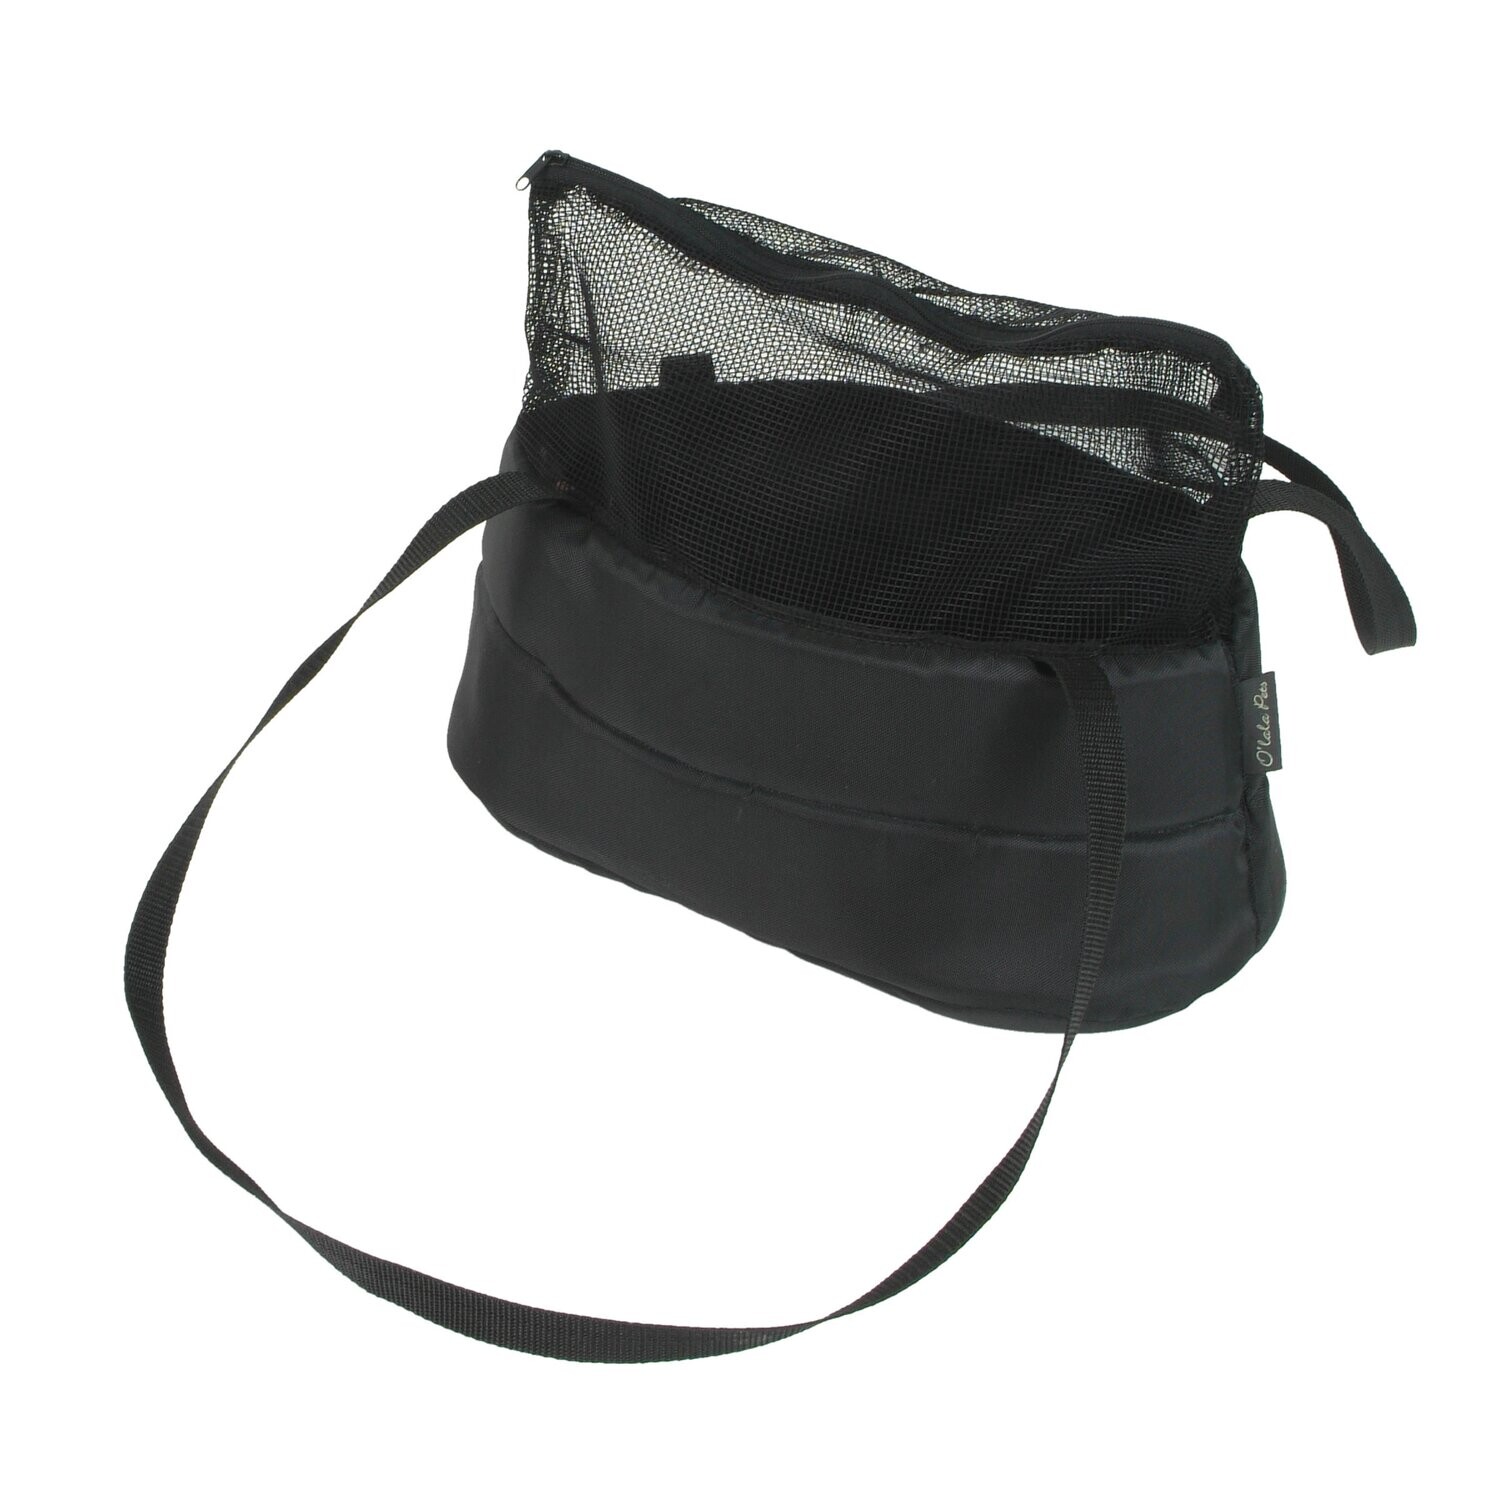 Bag For rodents, Farbe: Schwarz